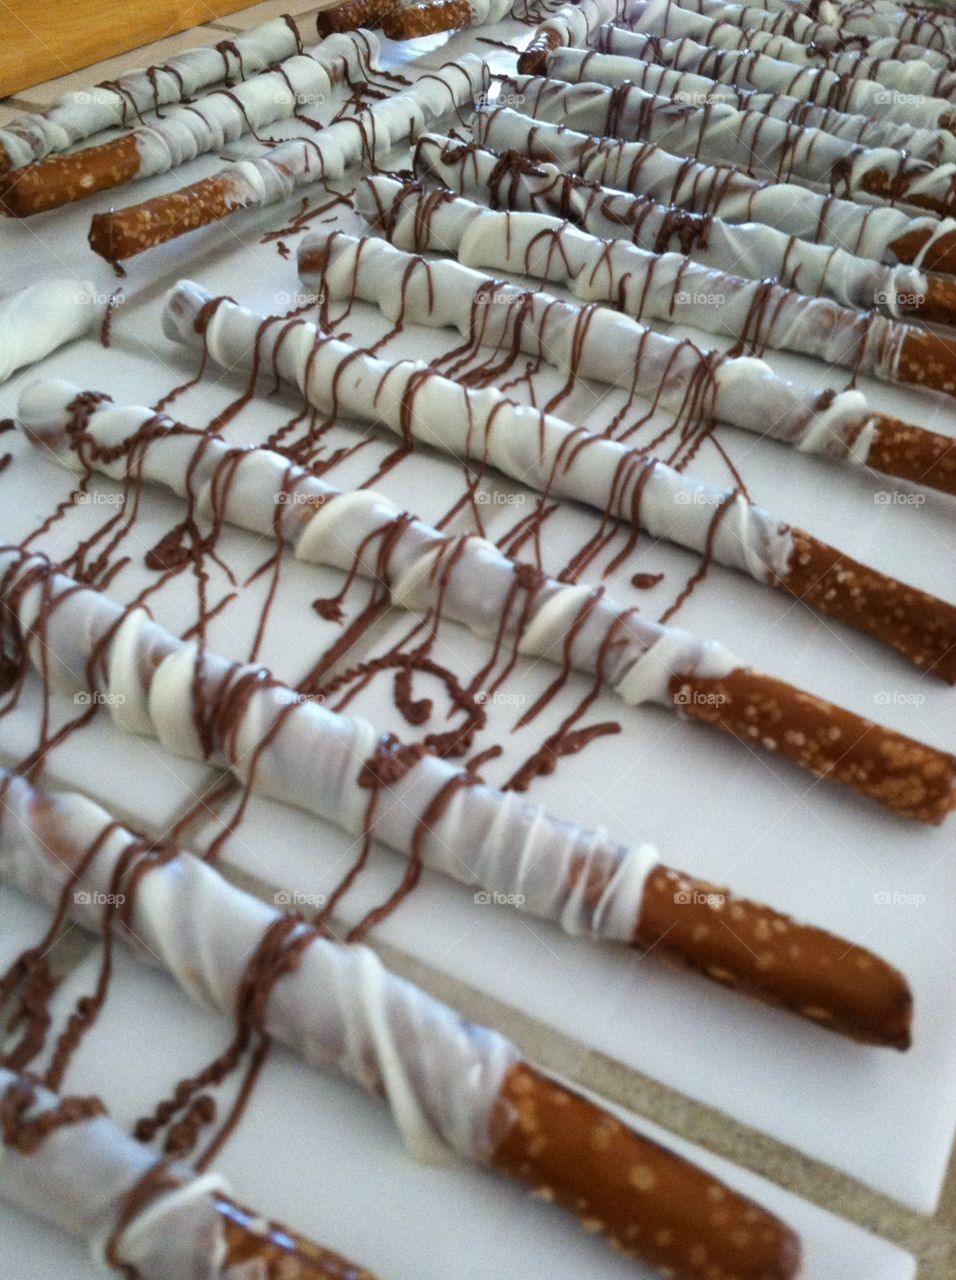 We love making our own special dipped and drizzled pretzels for everyone to snack on
